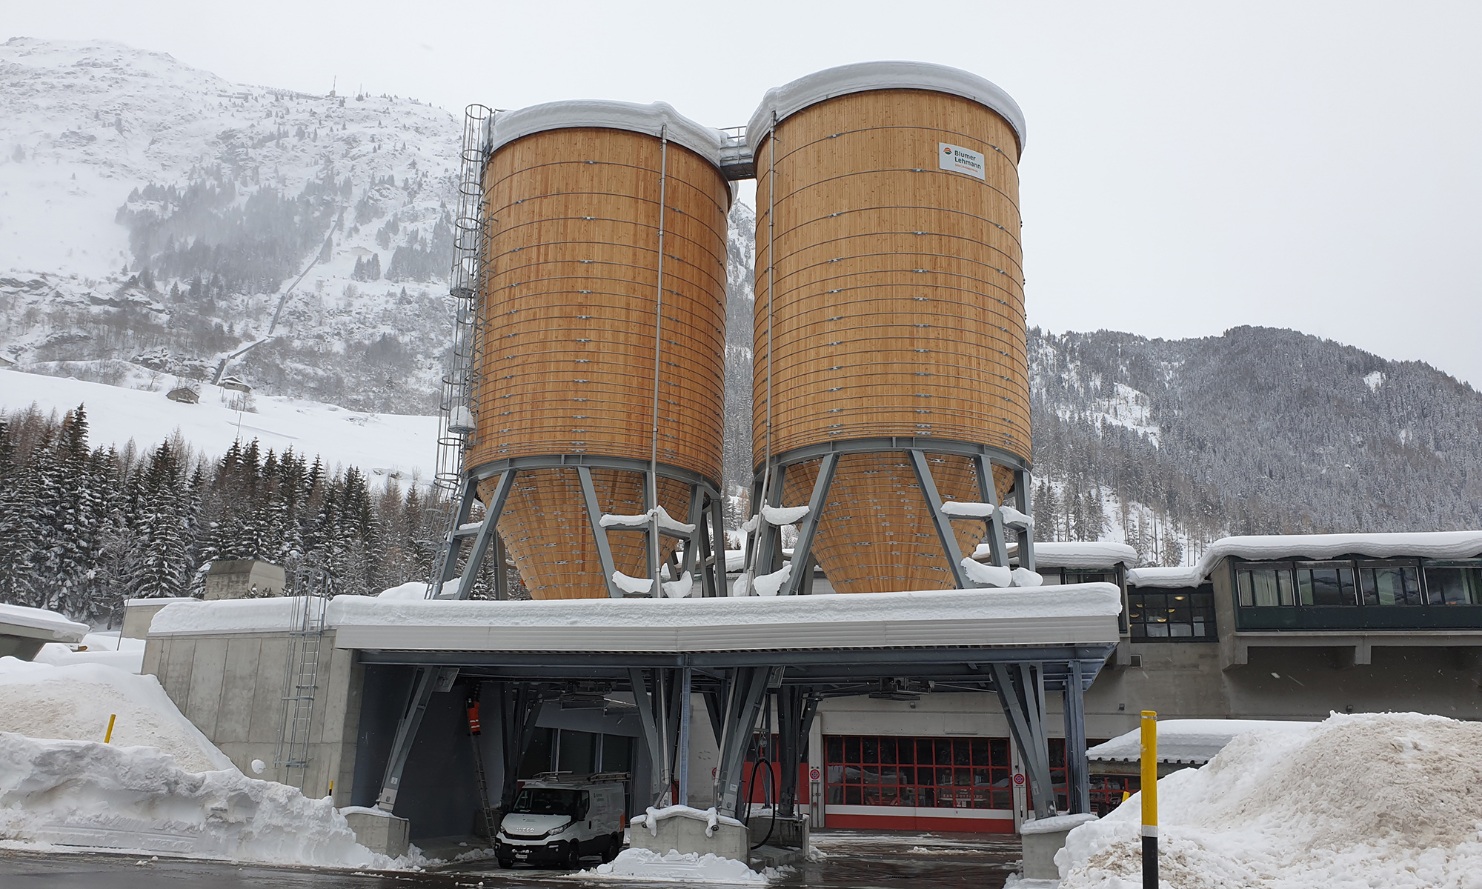 Grit silo system in Airolo with wooden salt silo and brine system